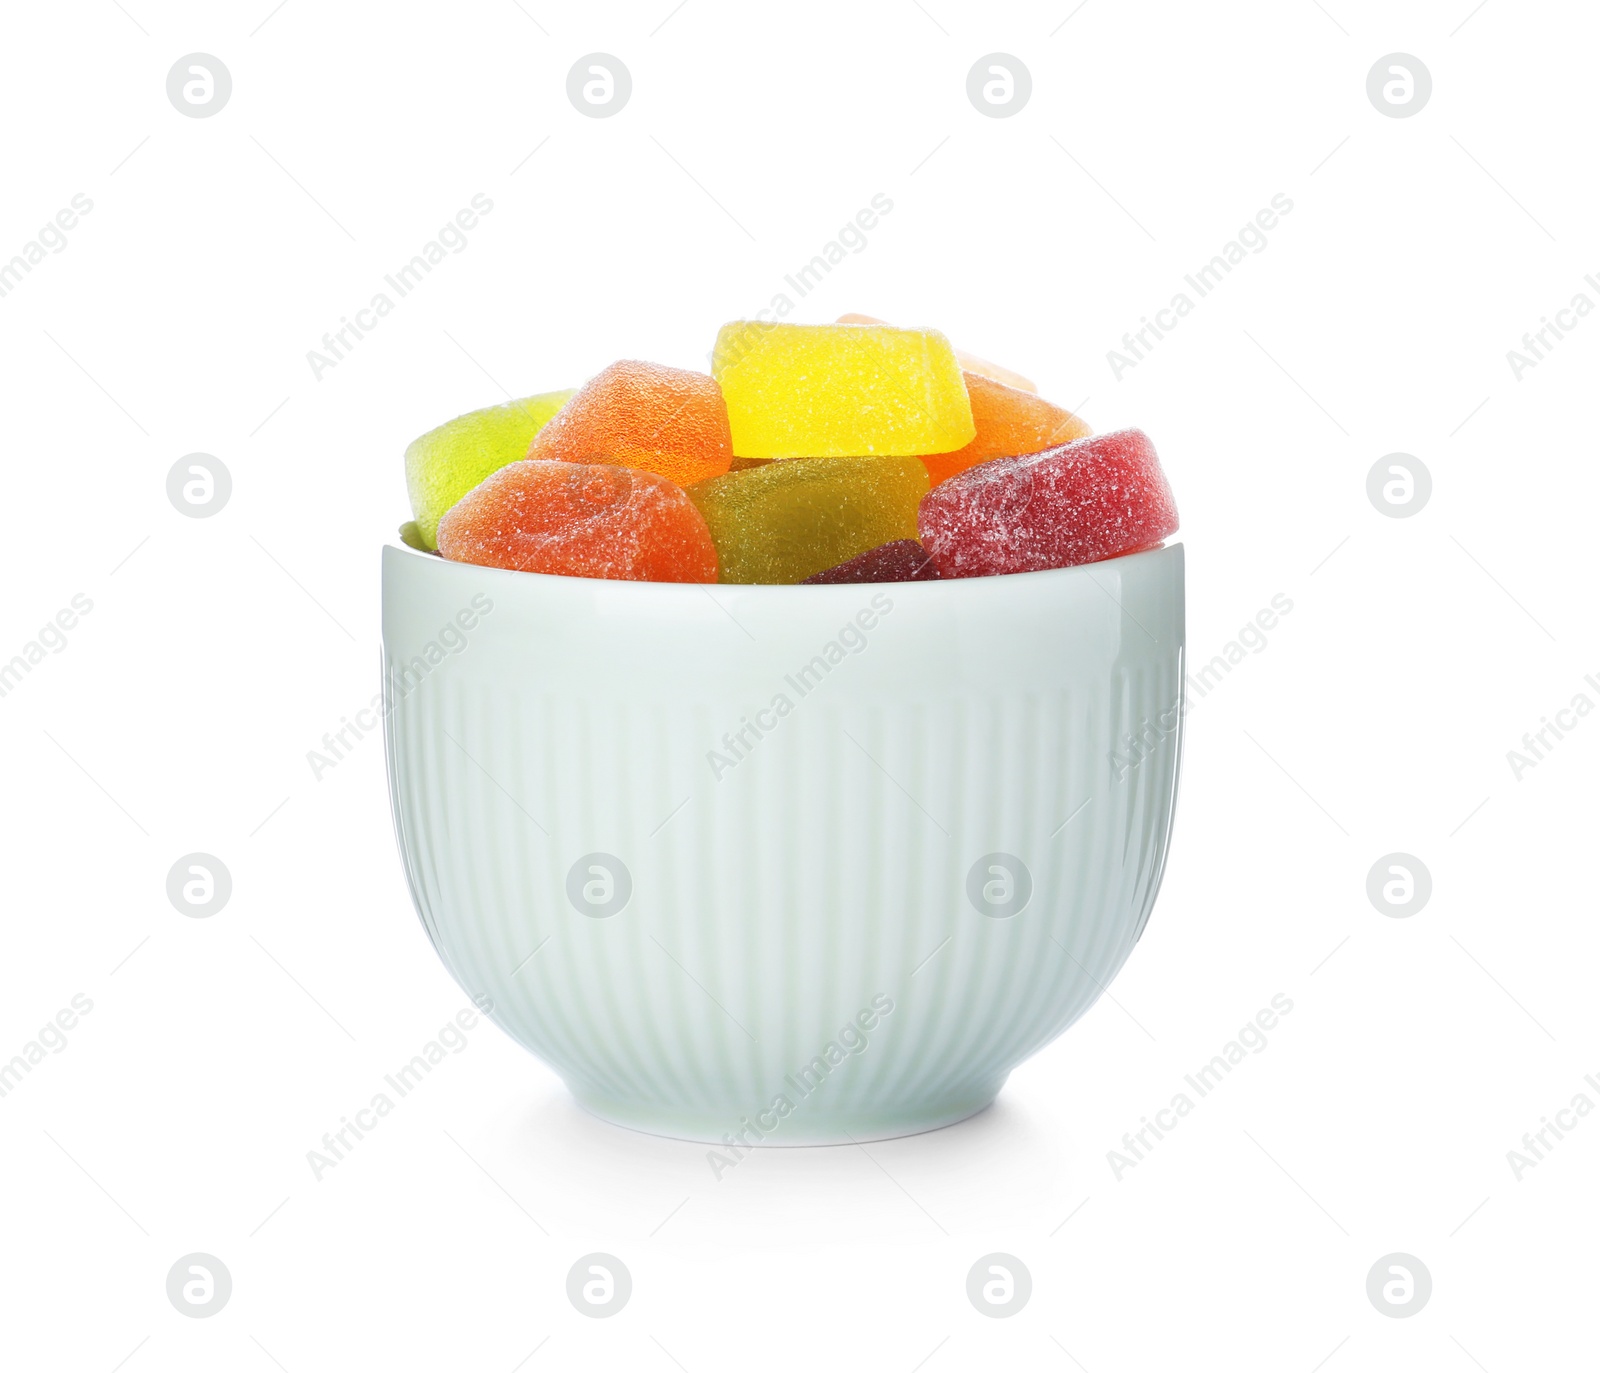 Photo of Bowl of delicious jelly candies on white background